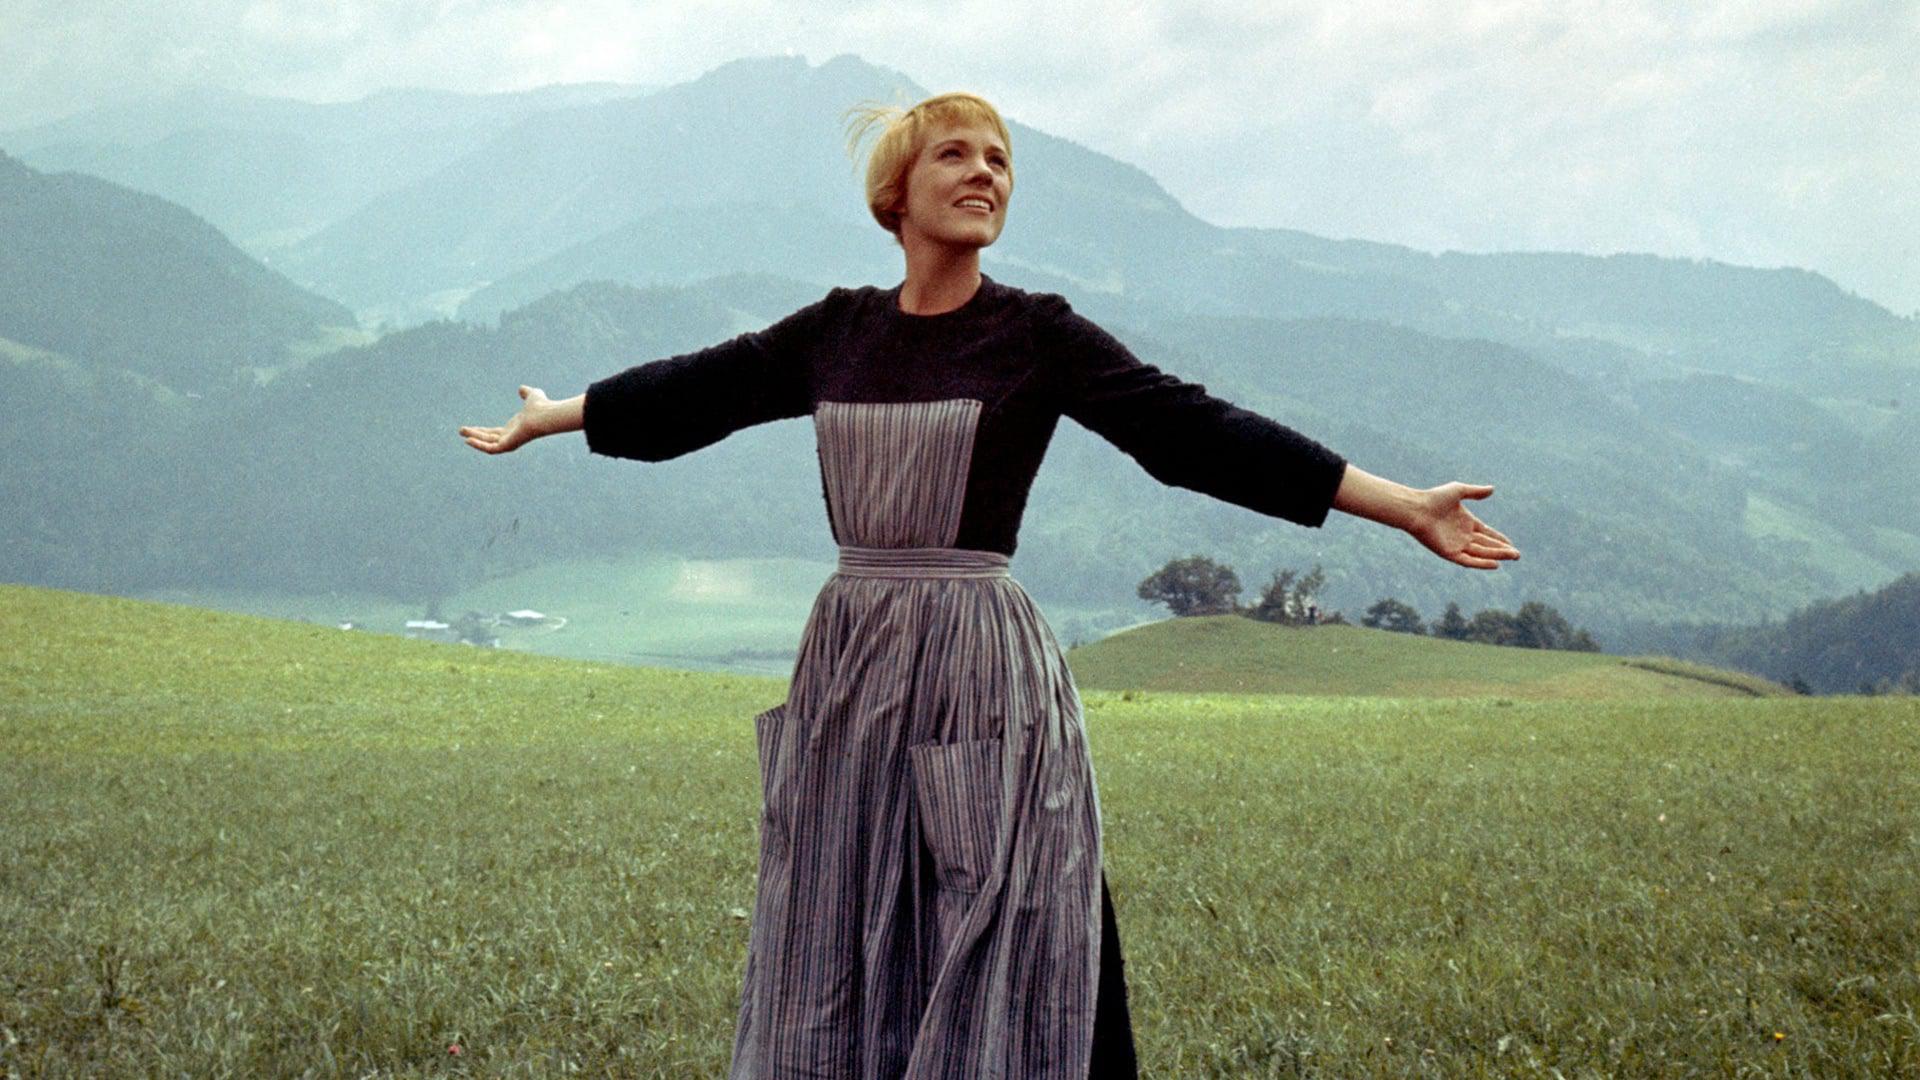 Backdrop Image for The Sound of Music